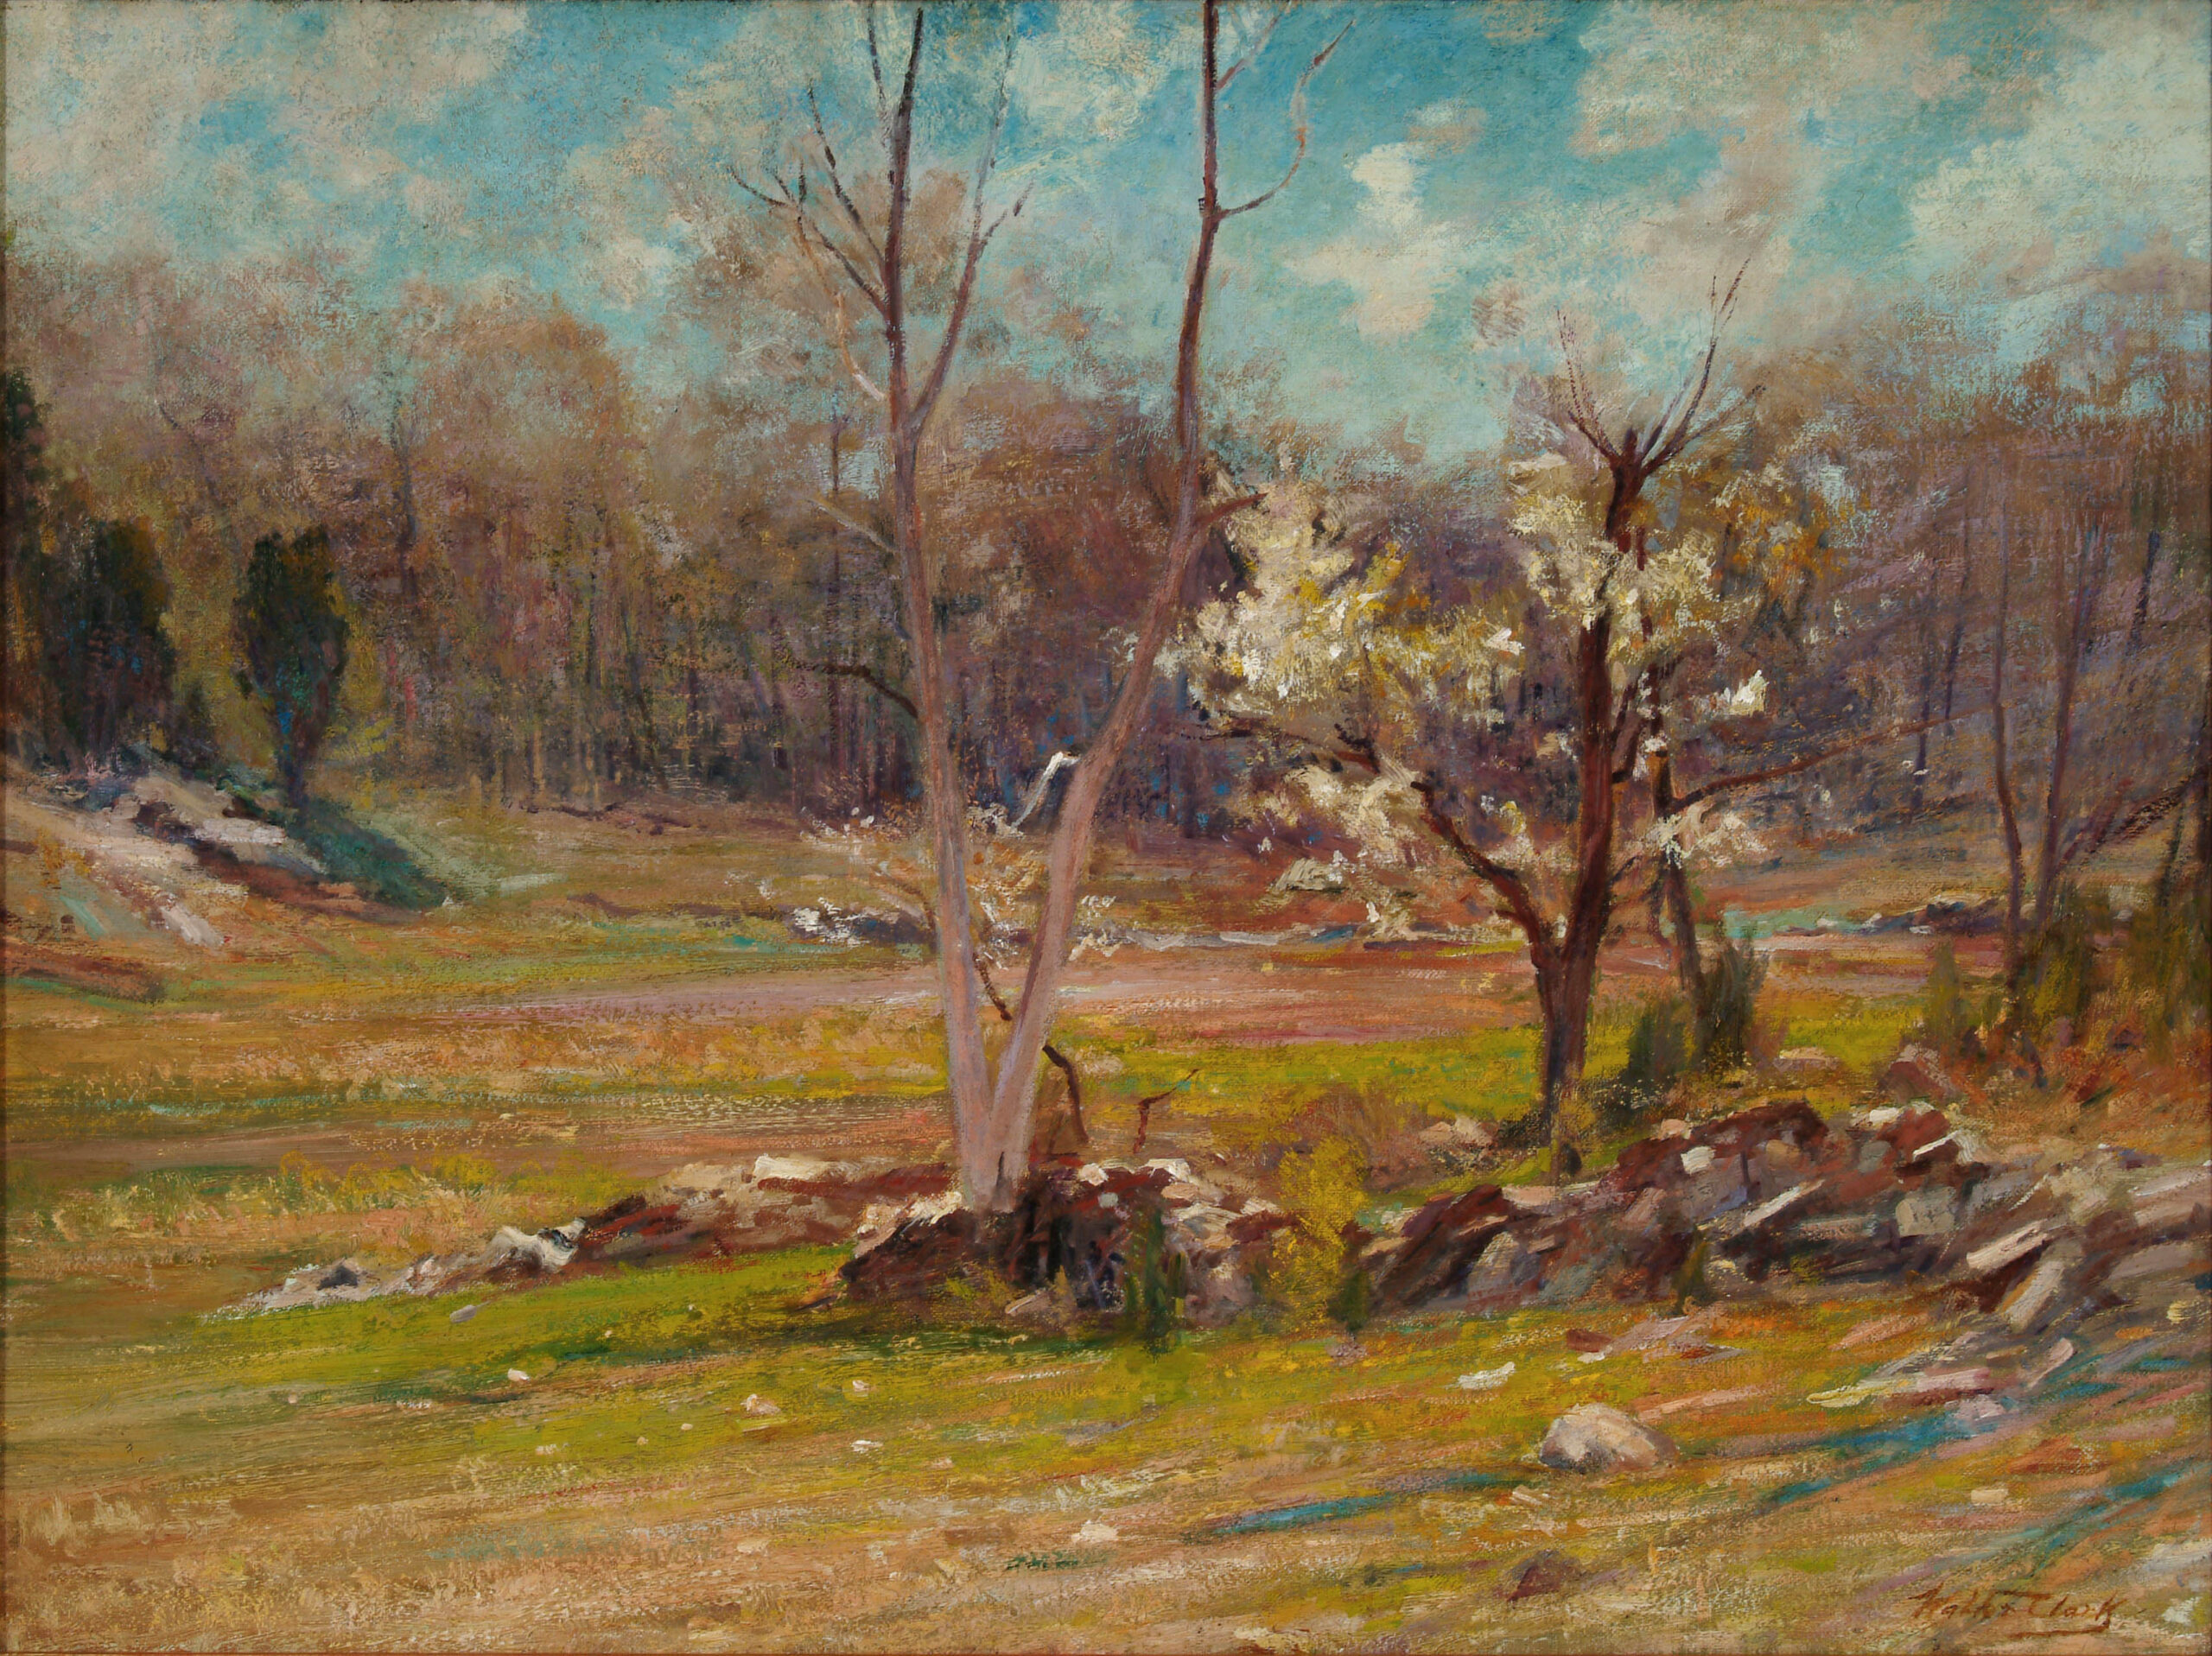 WALTER CLARK (1848-1917) Early Spring, after 1910, oil on canvas, 20 x 27 inches